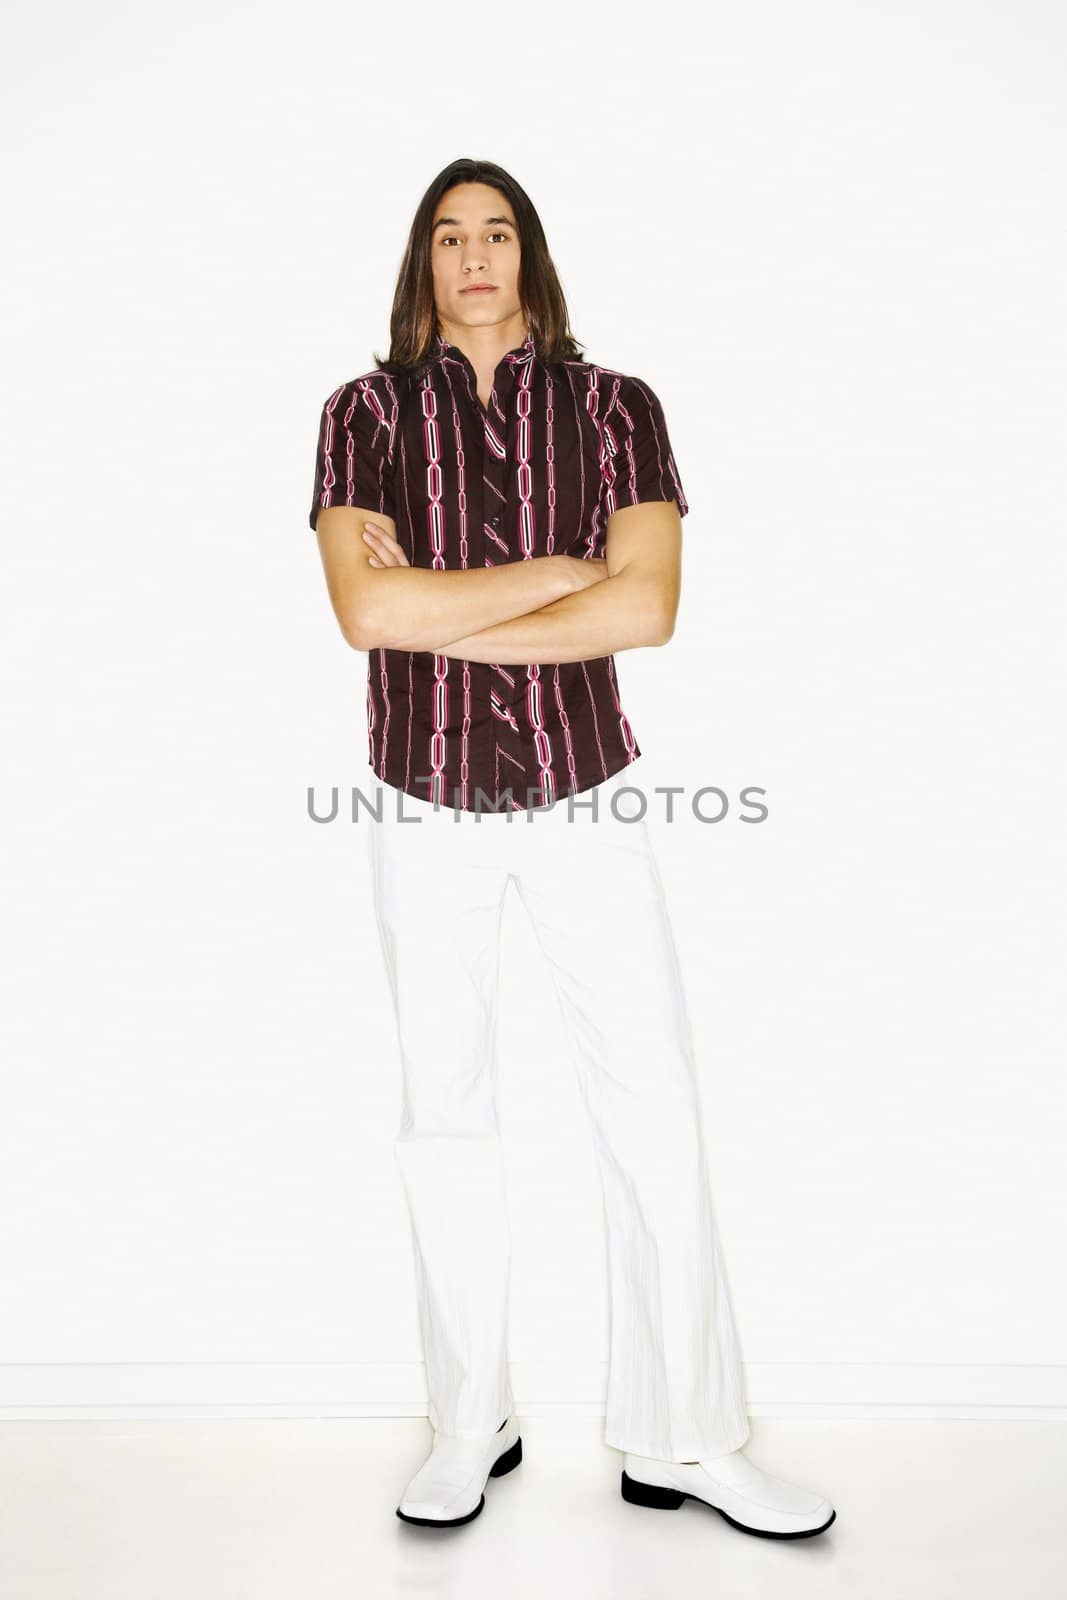 Portrait of Asian-American teen boy standing with arms crossed in front of white background.